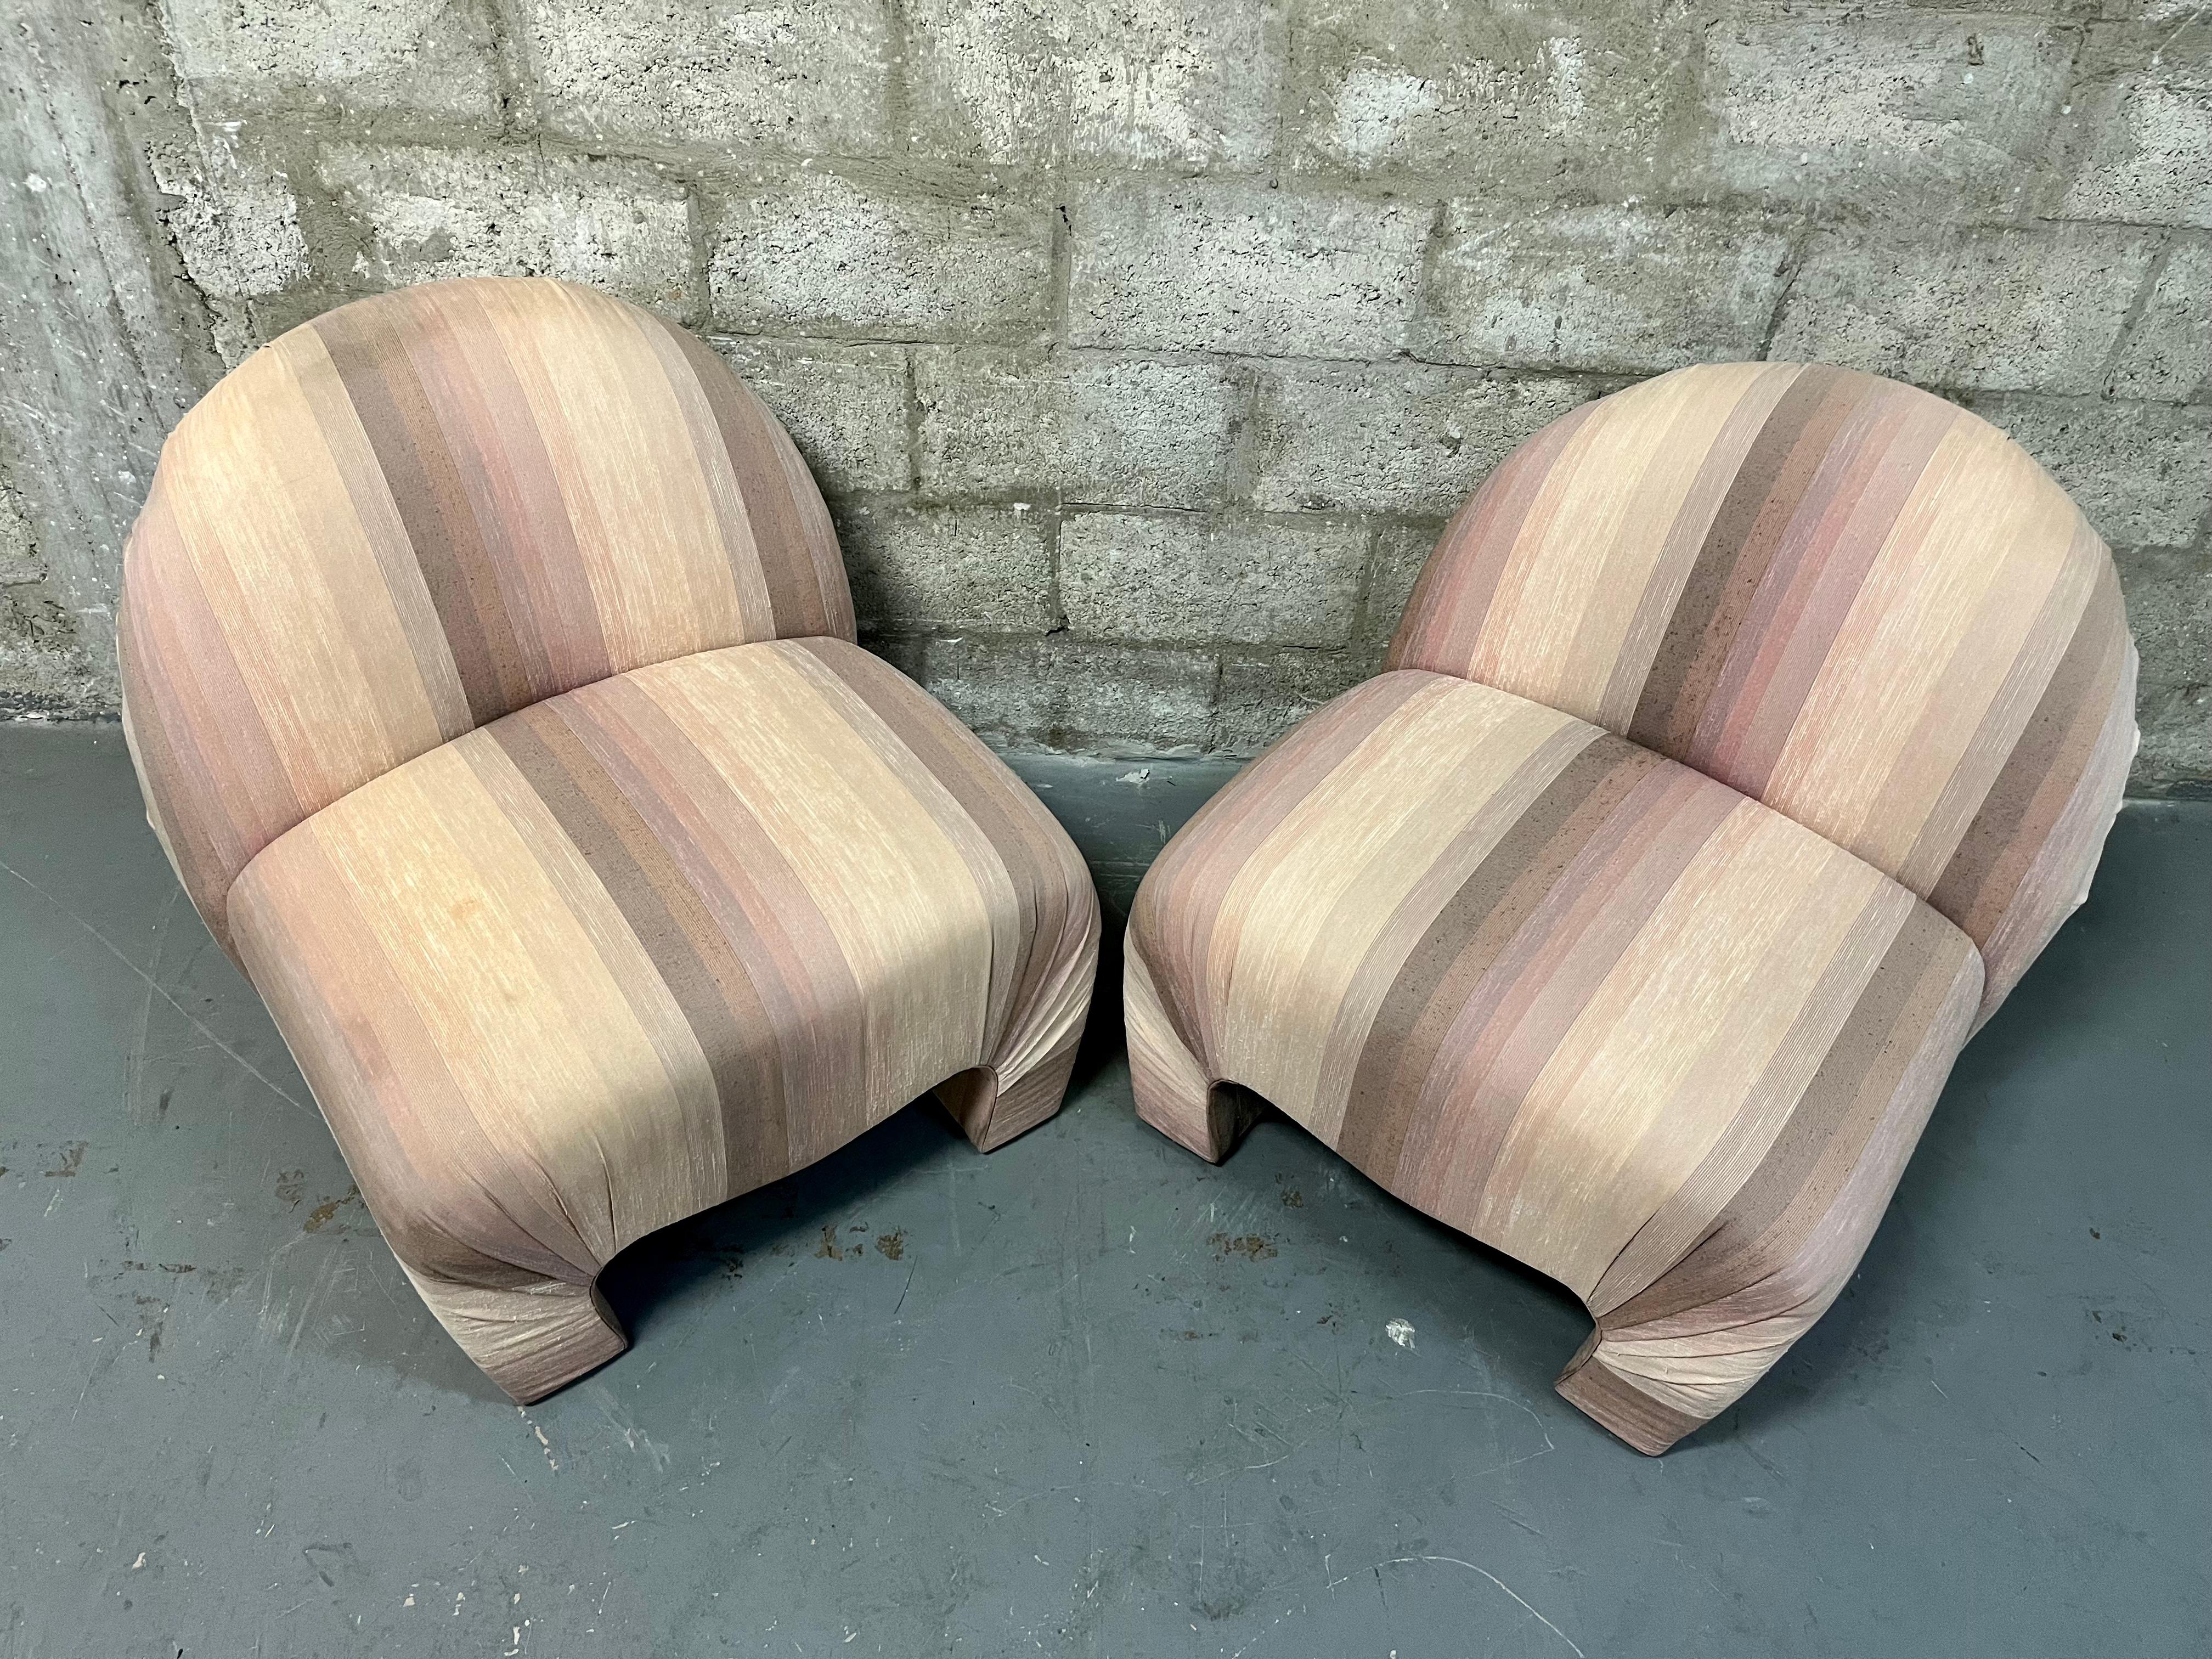 A Pair of Lounge Chairs in the Vladimir Kagan for Weiman Style. Circa 1980s In Good Condition For Sale In Miami, FL